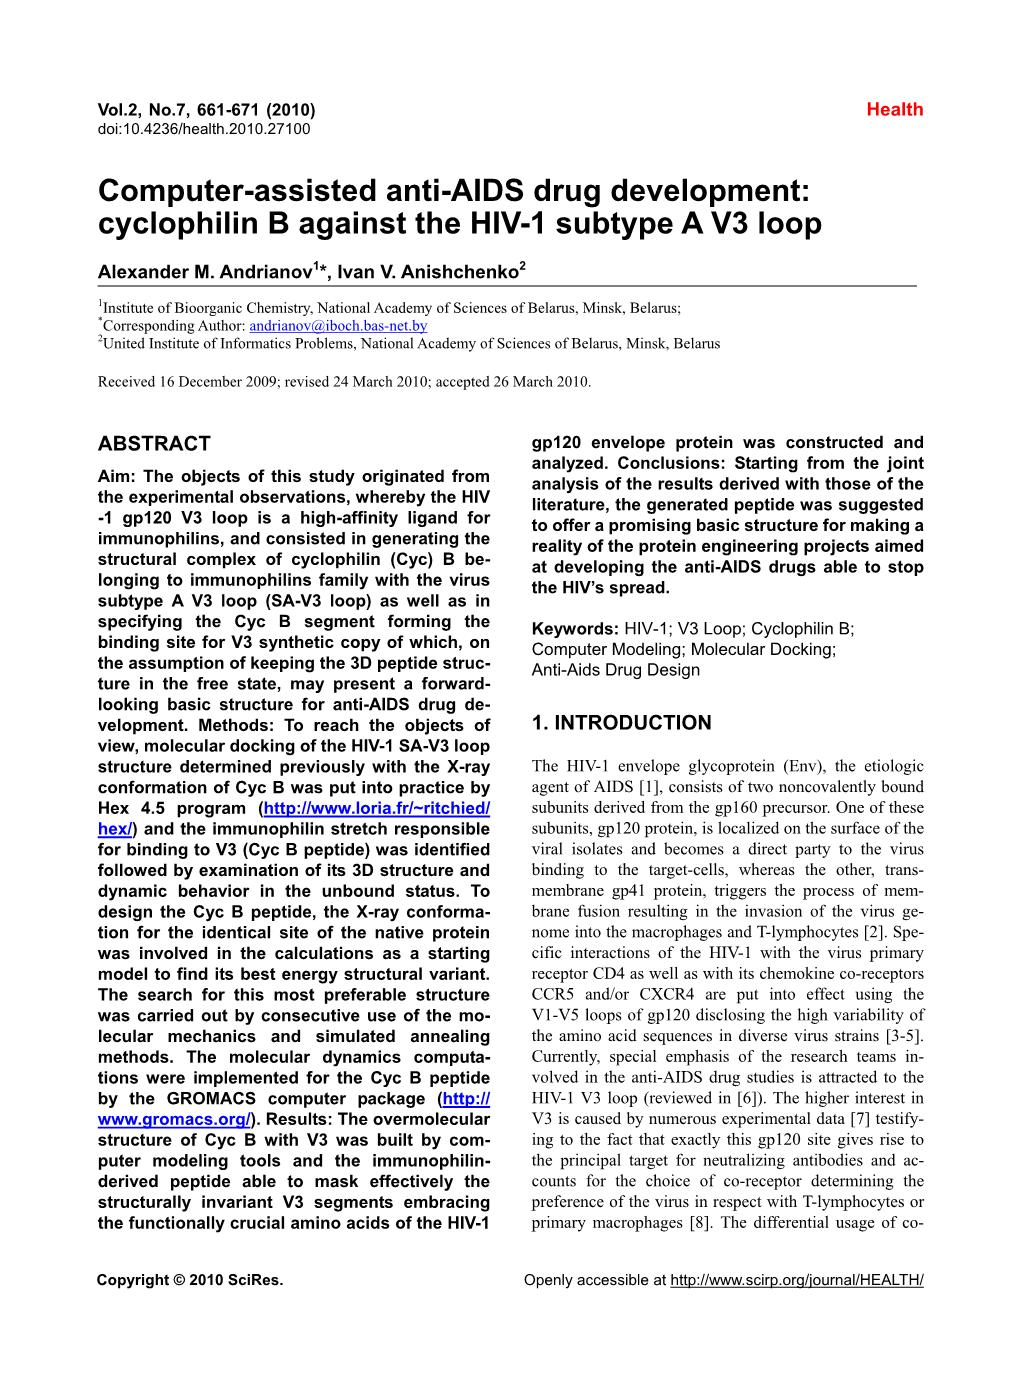 Computer-Assisted Anti-AIDS Drug Development: Cyclophilin B Against the HIV-1 Subtype a V3 Loop